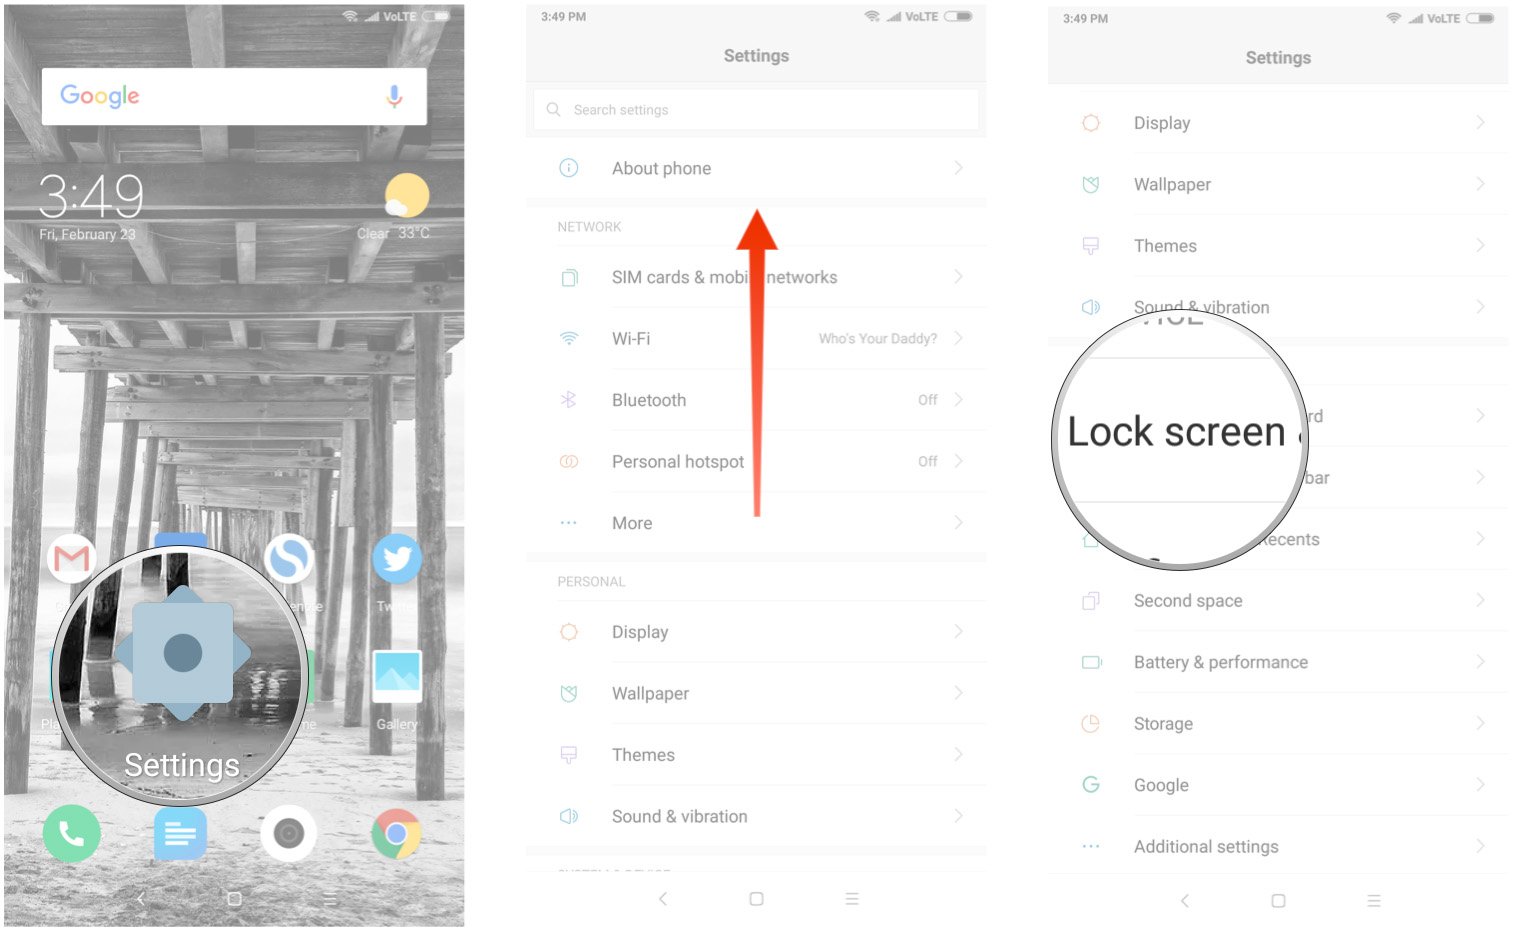 face-unlock-redmi-note-5-pro-how-to.jpg?